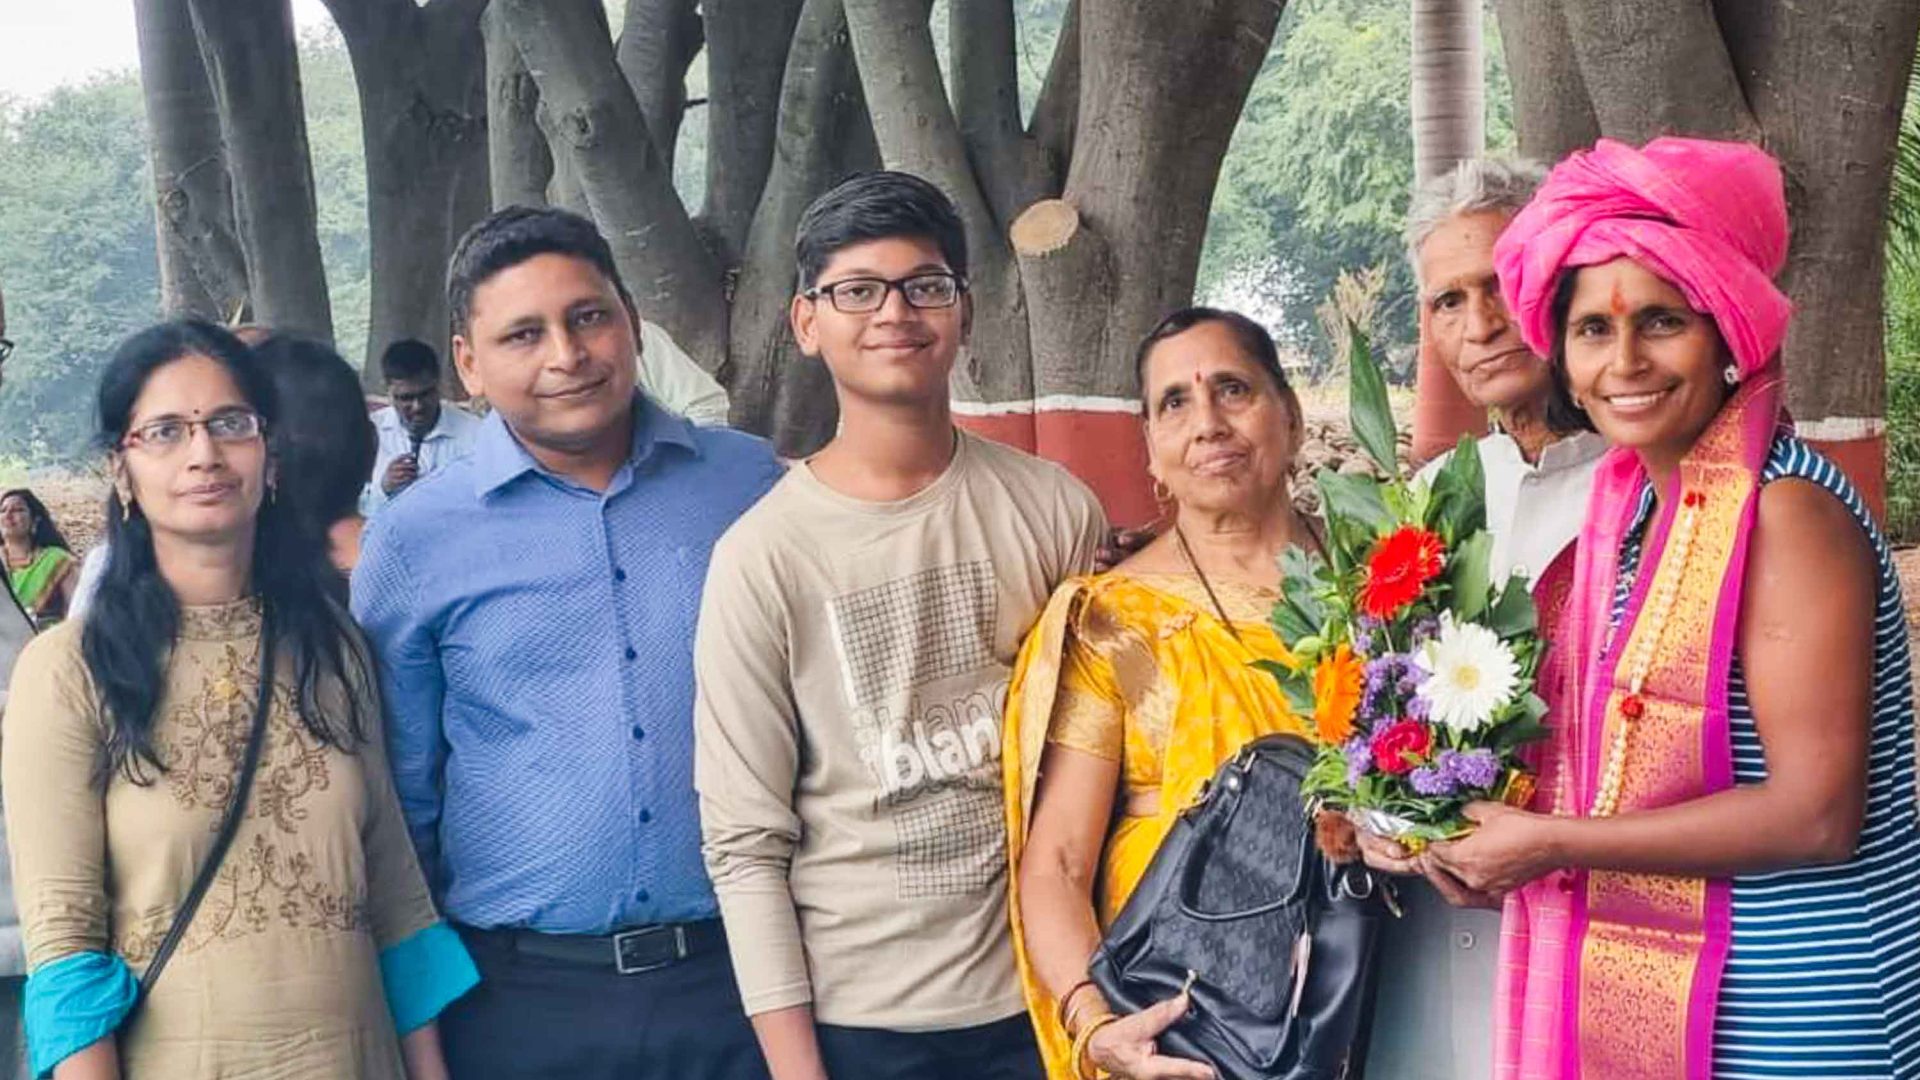 Preeti and her family.